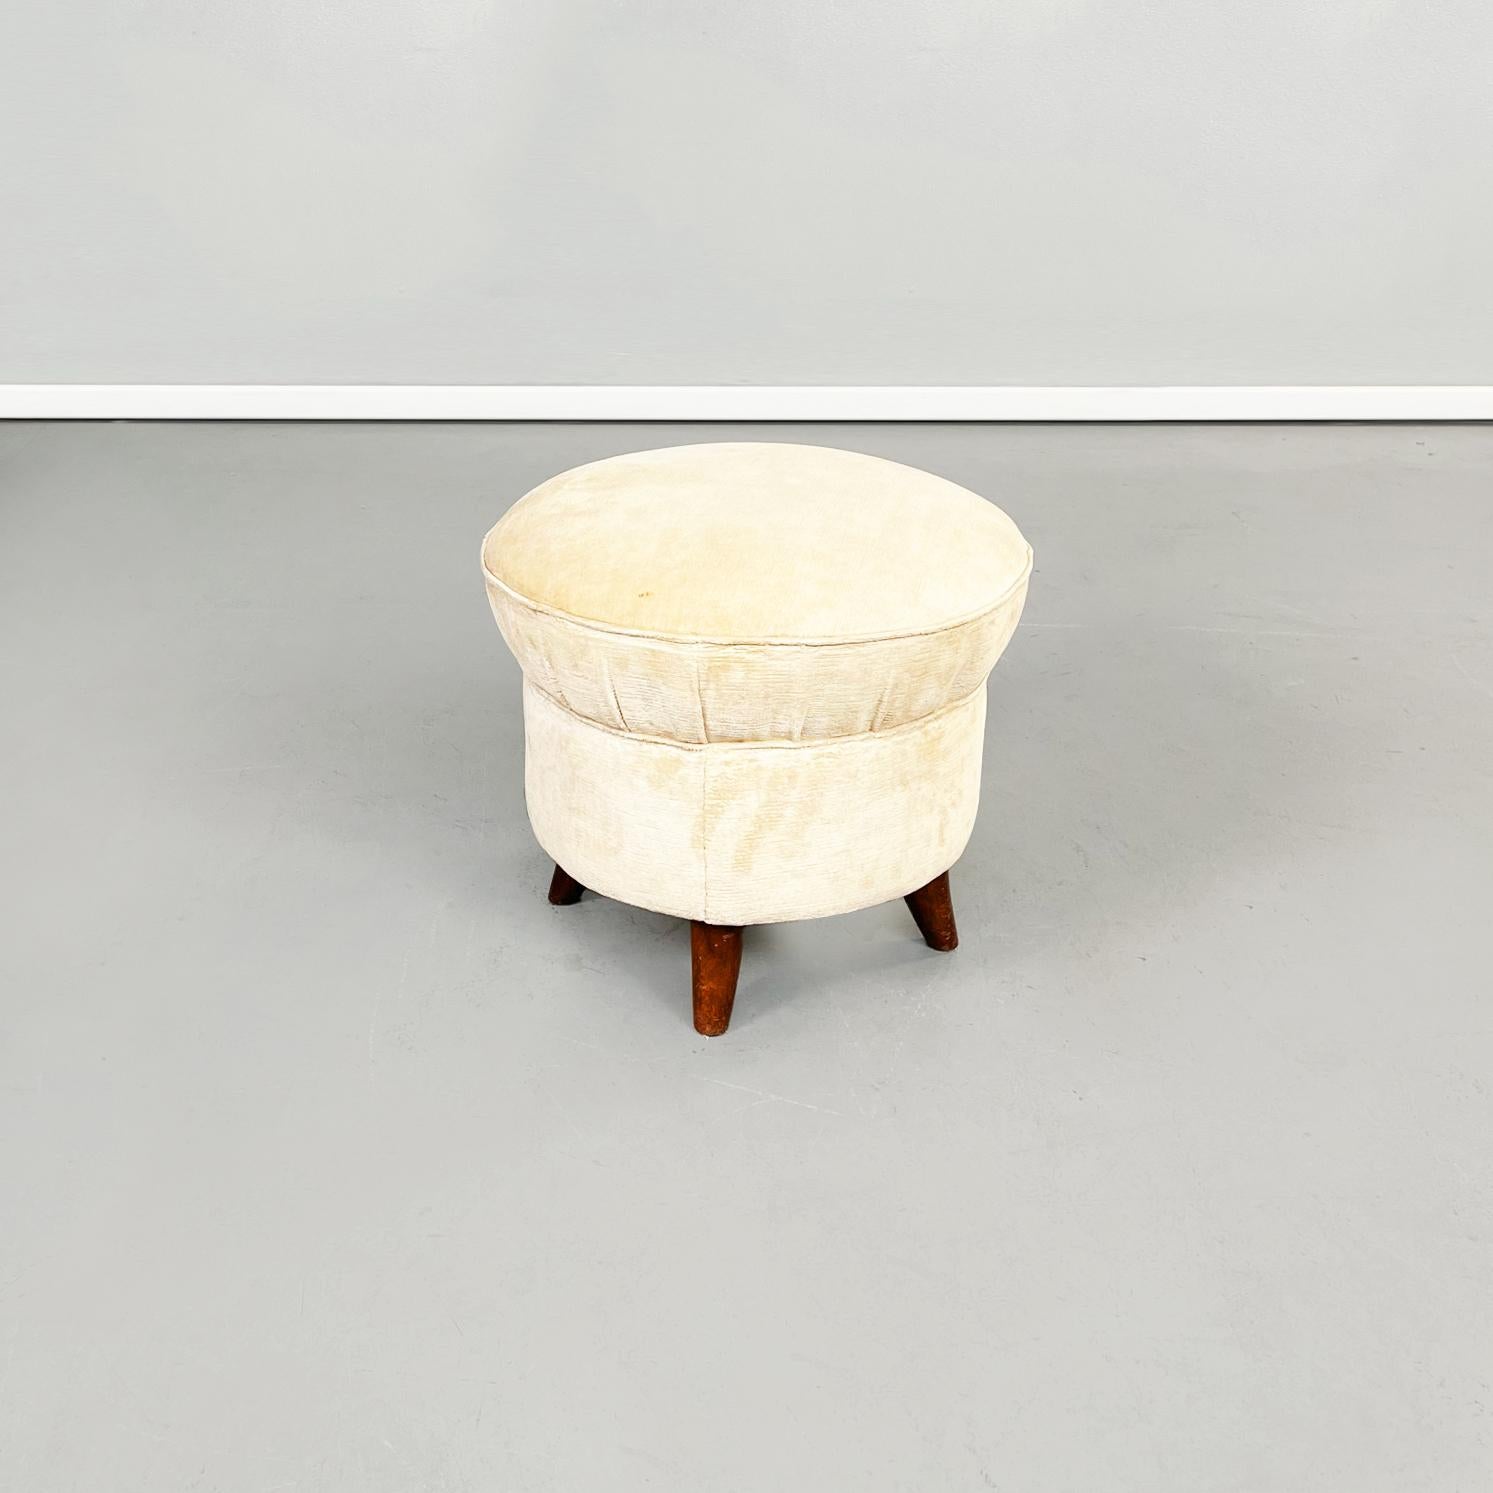 Italian Mid-Century Modern wooden poufs in beige fabric, 1960s.
Set of three poufs in beige fabric and wooden structure. The poufs are cylindrical in shape, with a slight curvature towards the top. The poufs are finished and have conical wooden